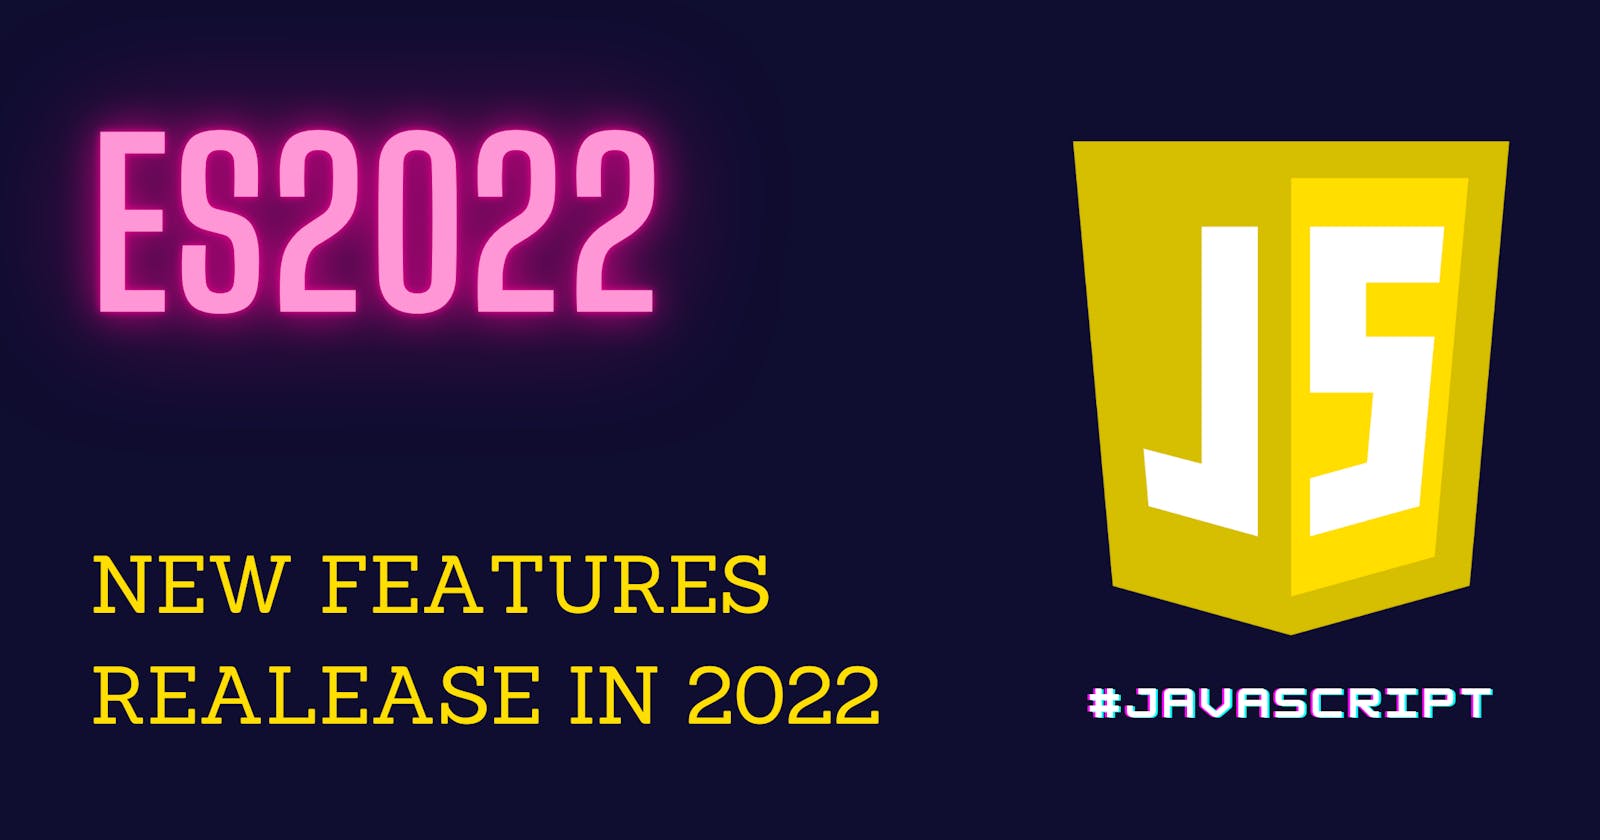 7 New features In JavaScript You Should Try In 2022🔥!